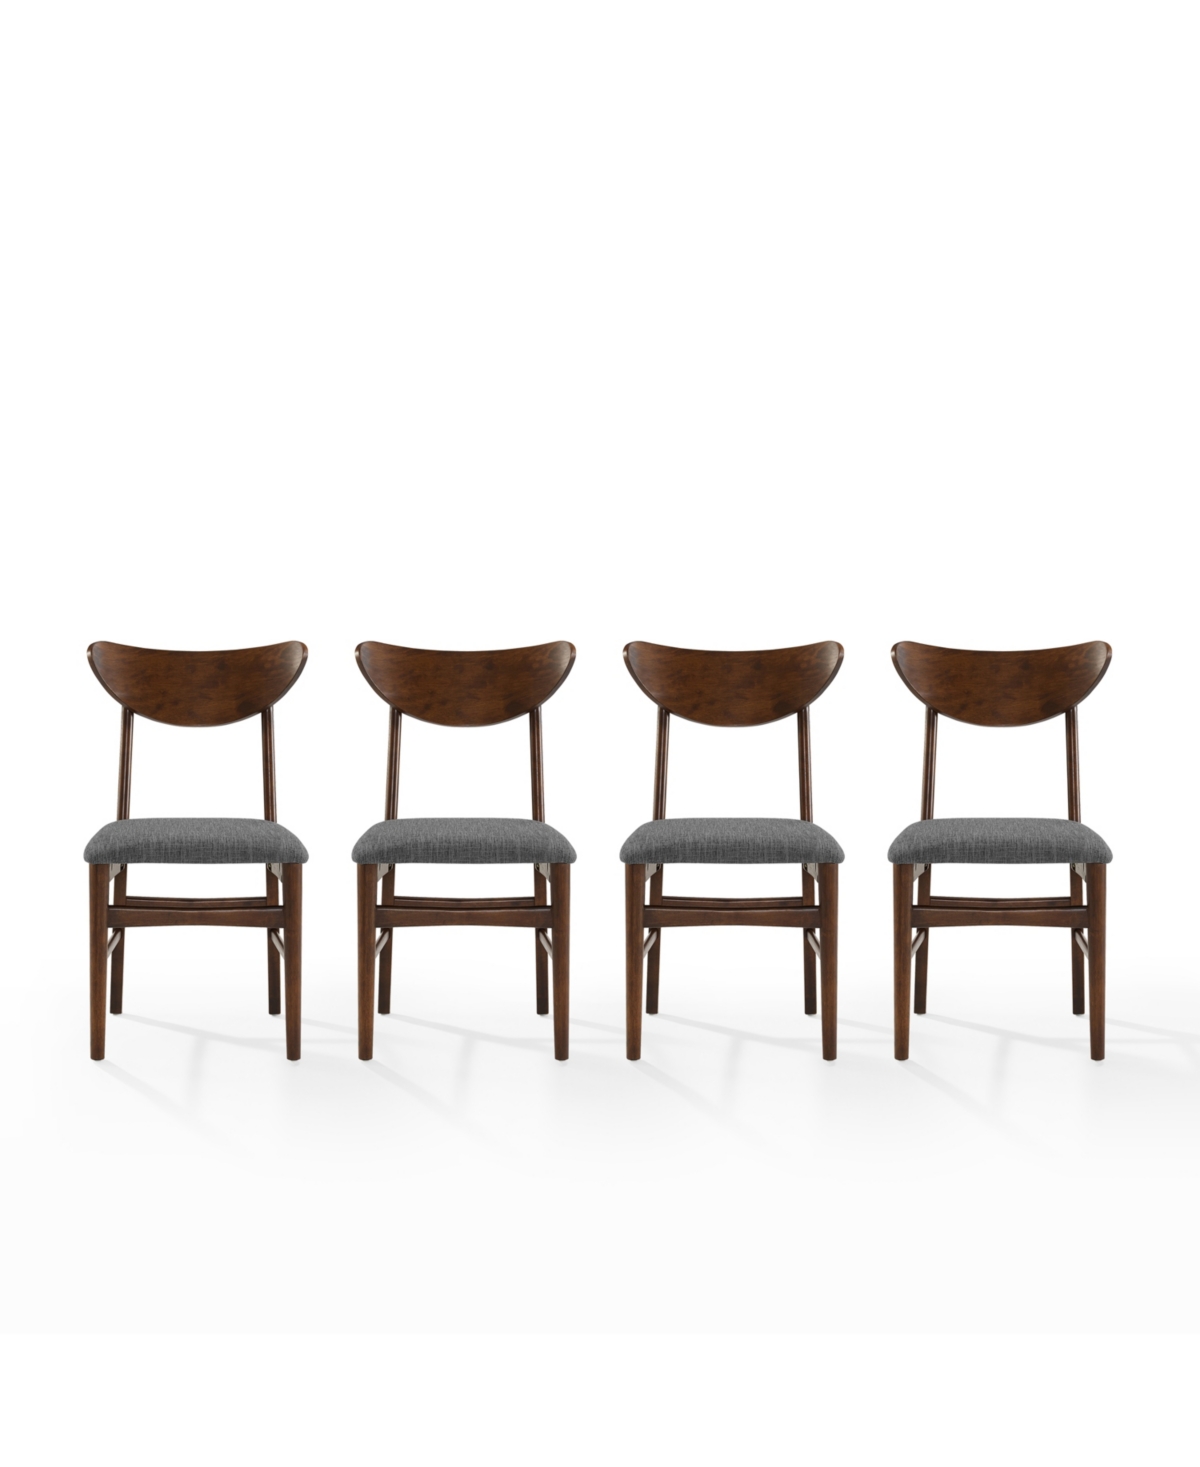 Shop Crosley Landon 4-piece Rubberwood Upholstered Dining Chair Set In Mahogany